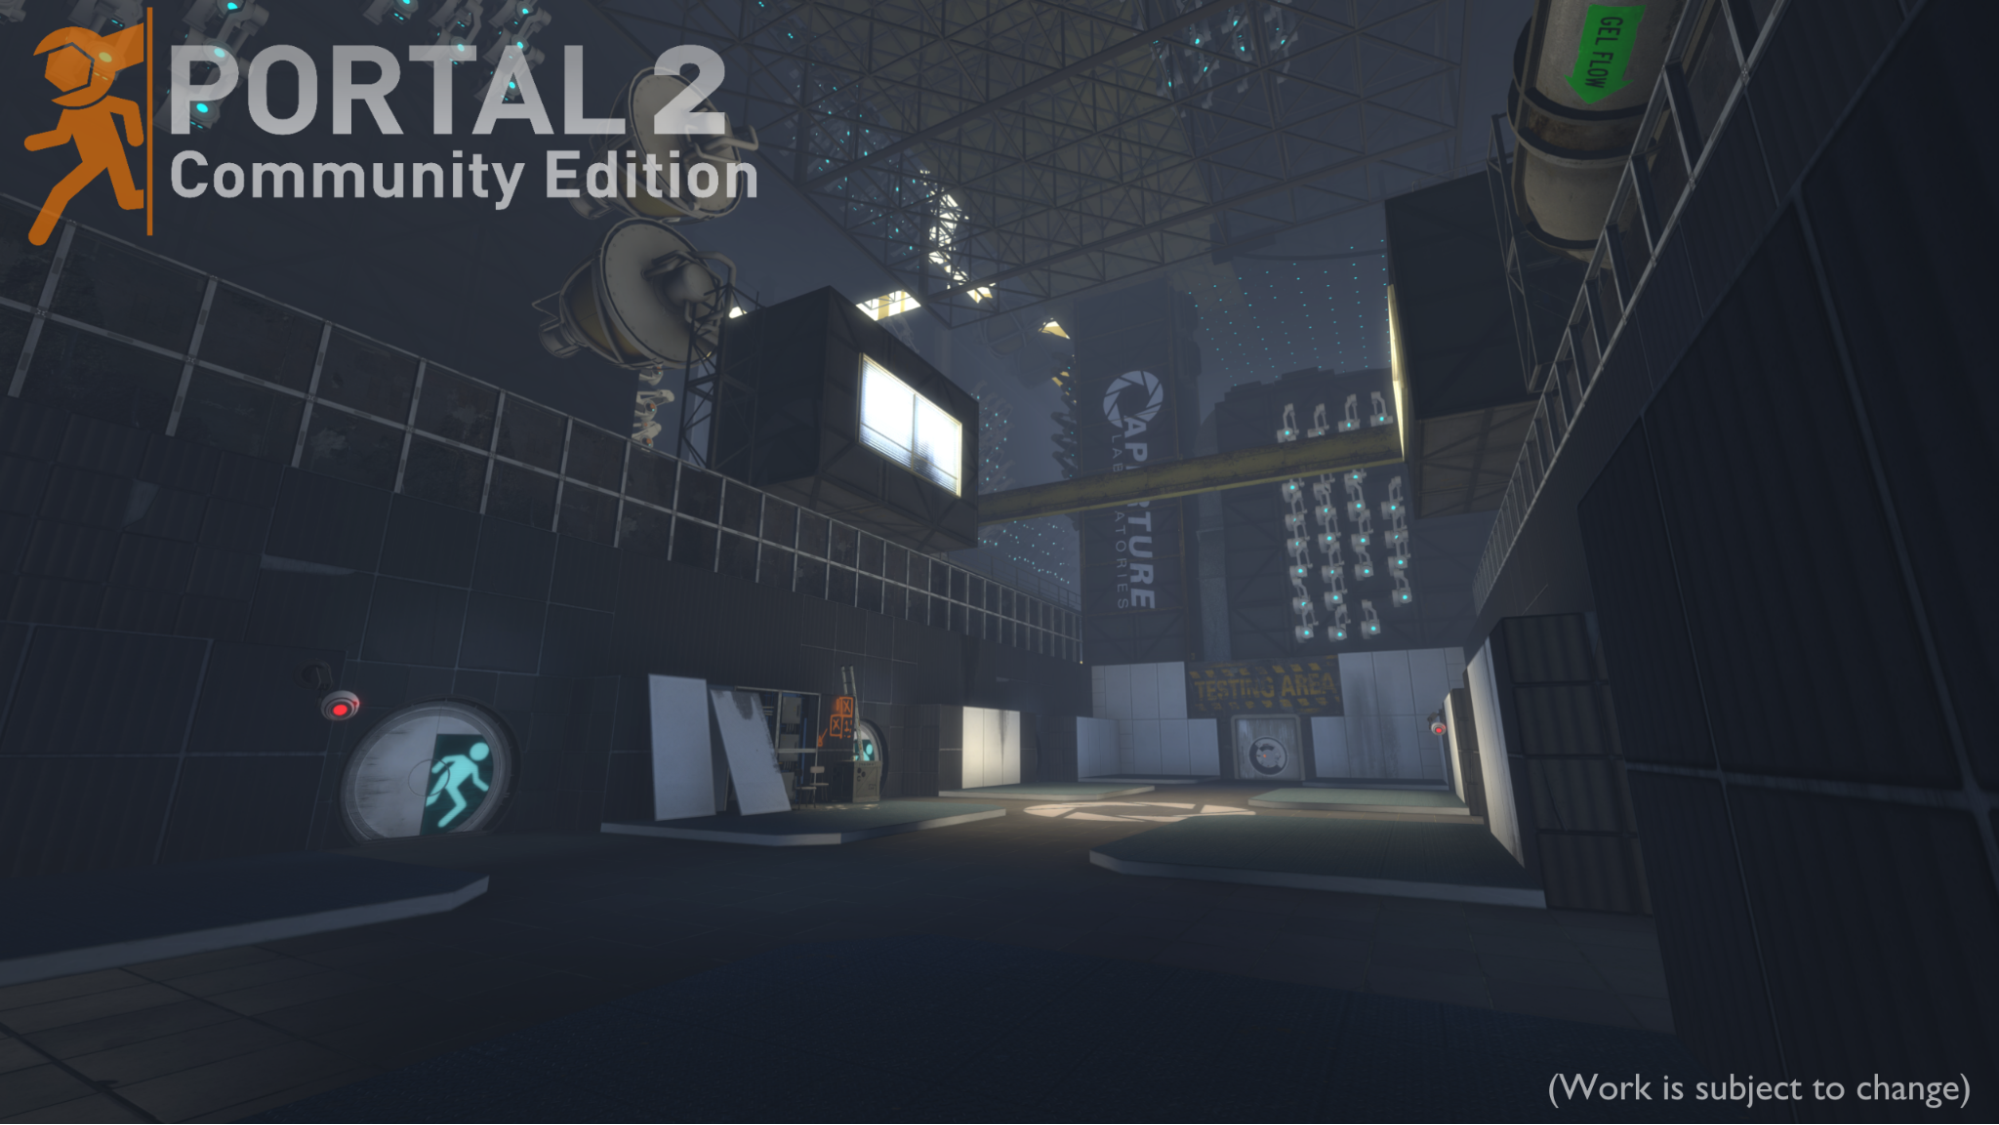 r the storylines of portal and portal 2 diff